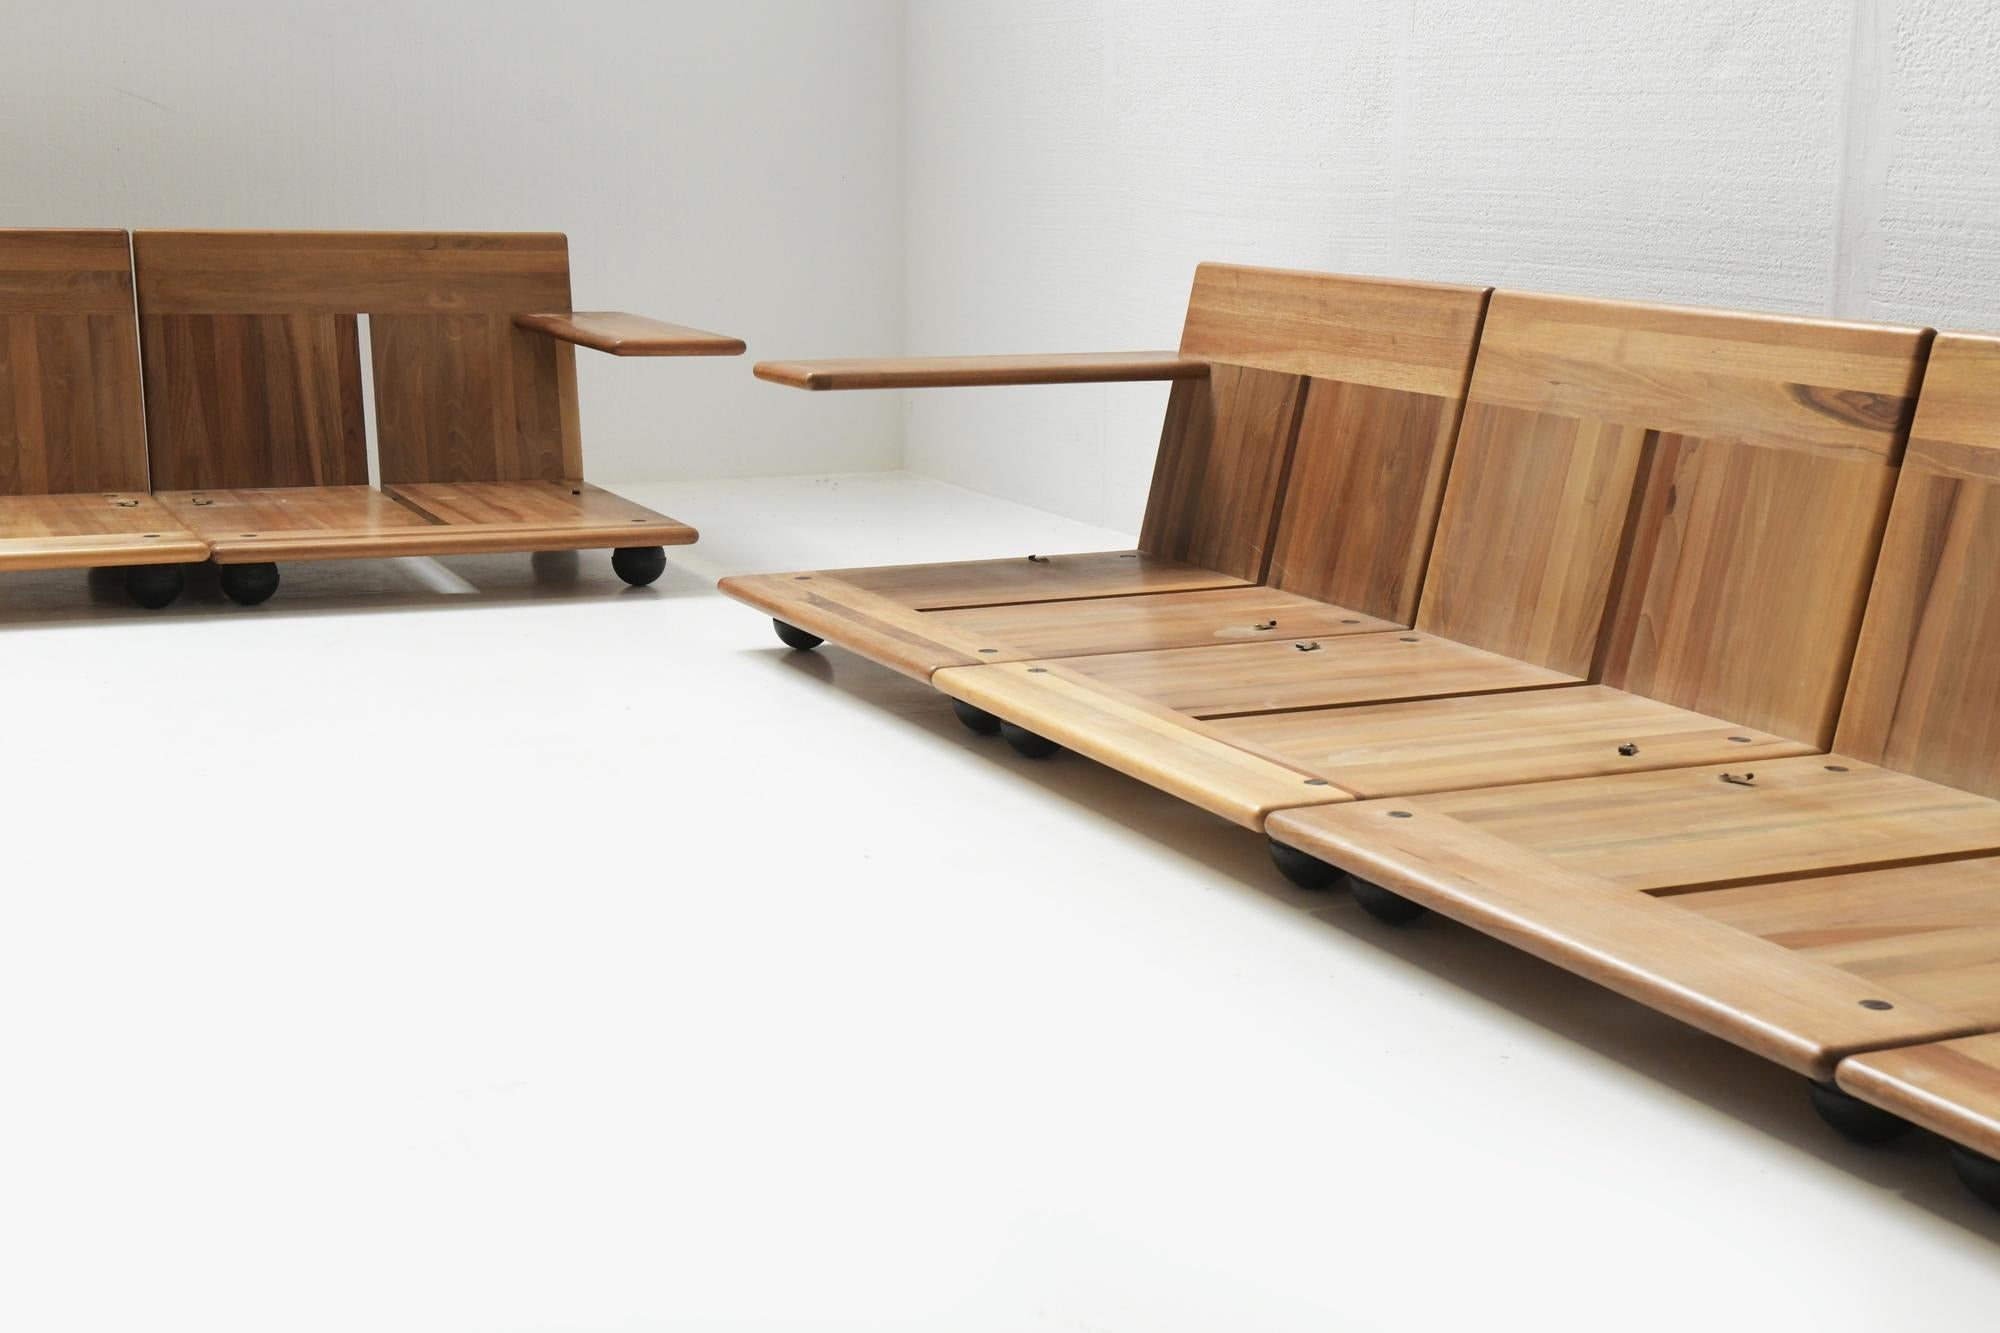 Fruitwood Stunning Modular Pianura Seating Group by Mario Bellini for Cassina Italy